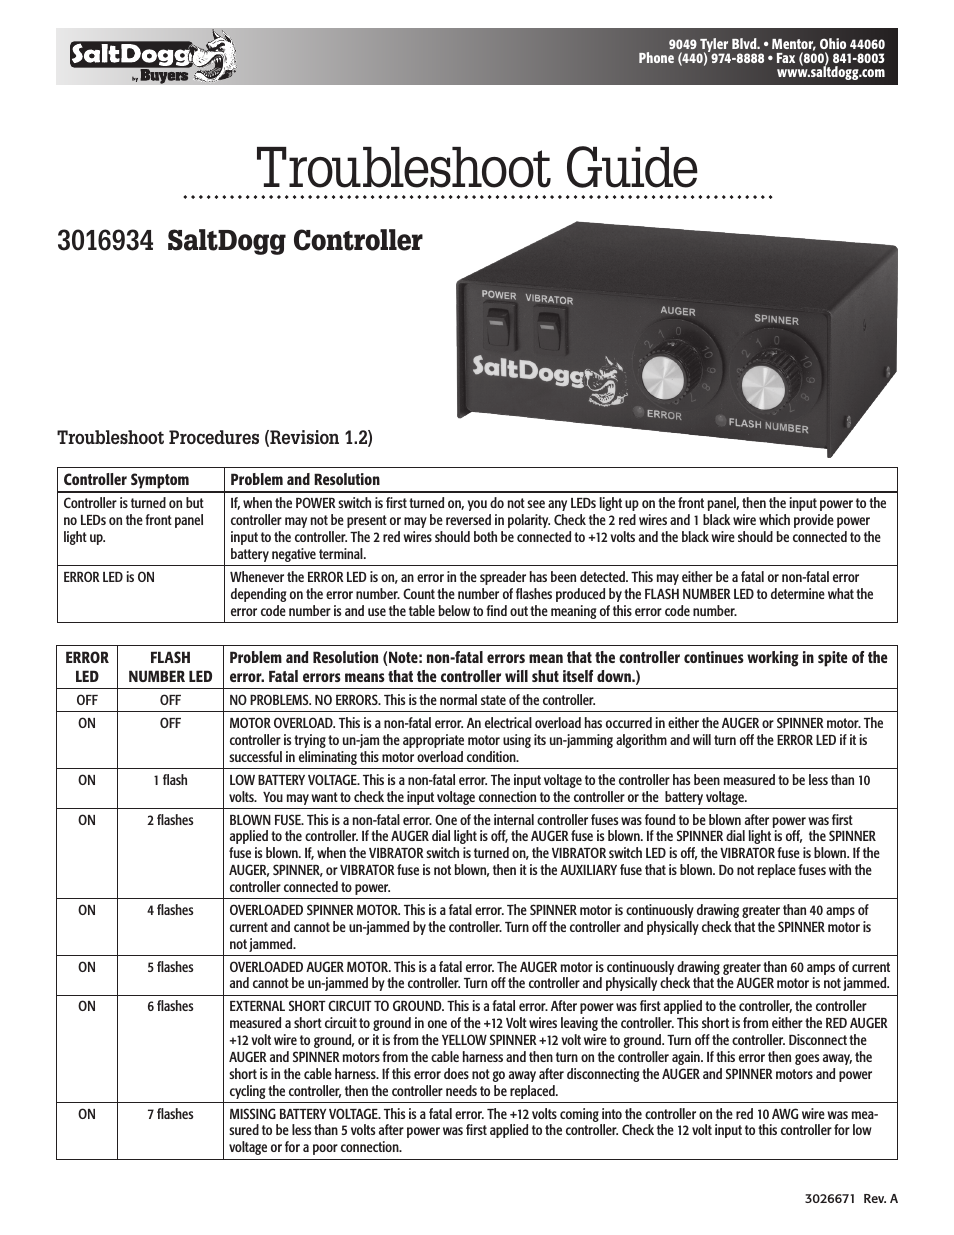 Controller (3016934) Troubleshoot Guide - SHPE6000, 1400601SS, 1400701SS, 92440SSA